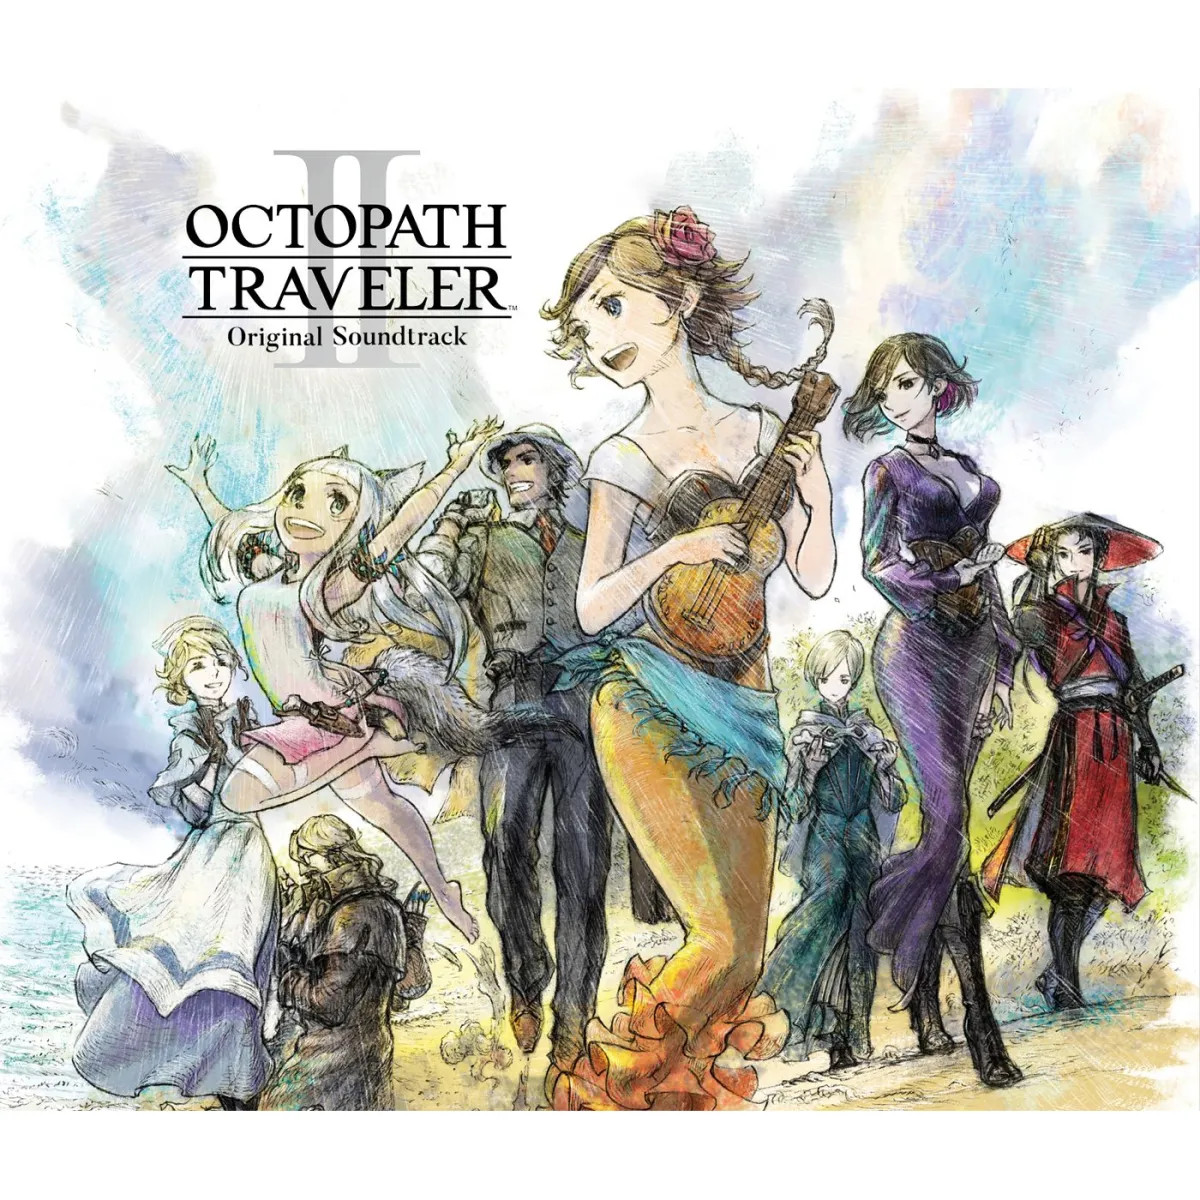 Octopath Traveler 2 announced for Nintendo Switch, coming in February 2023